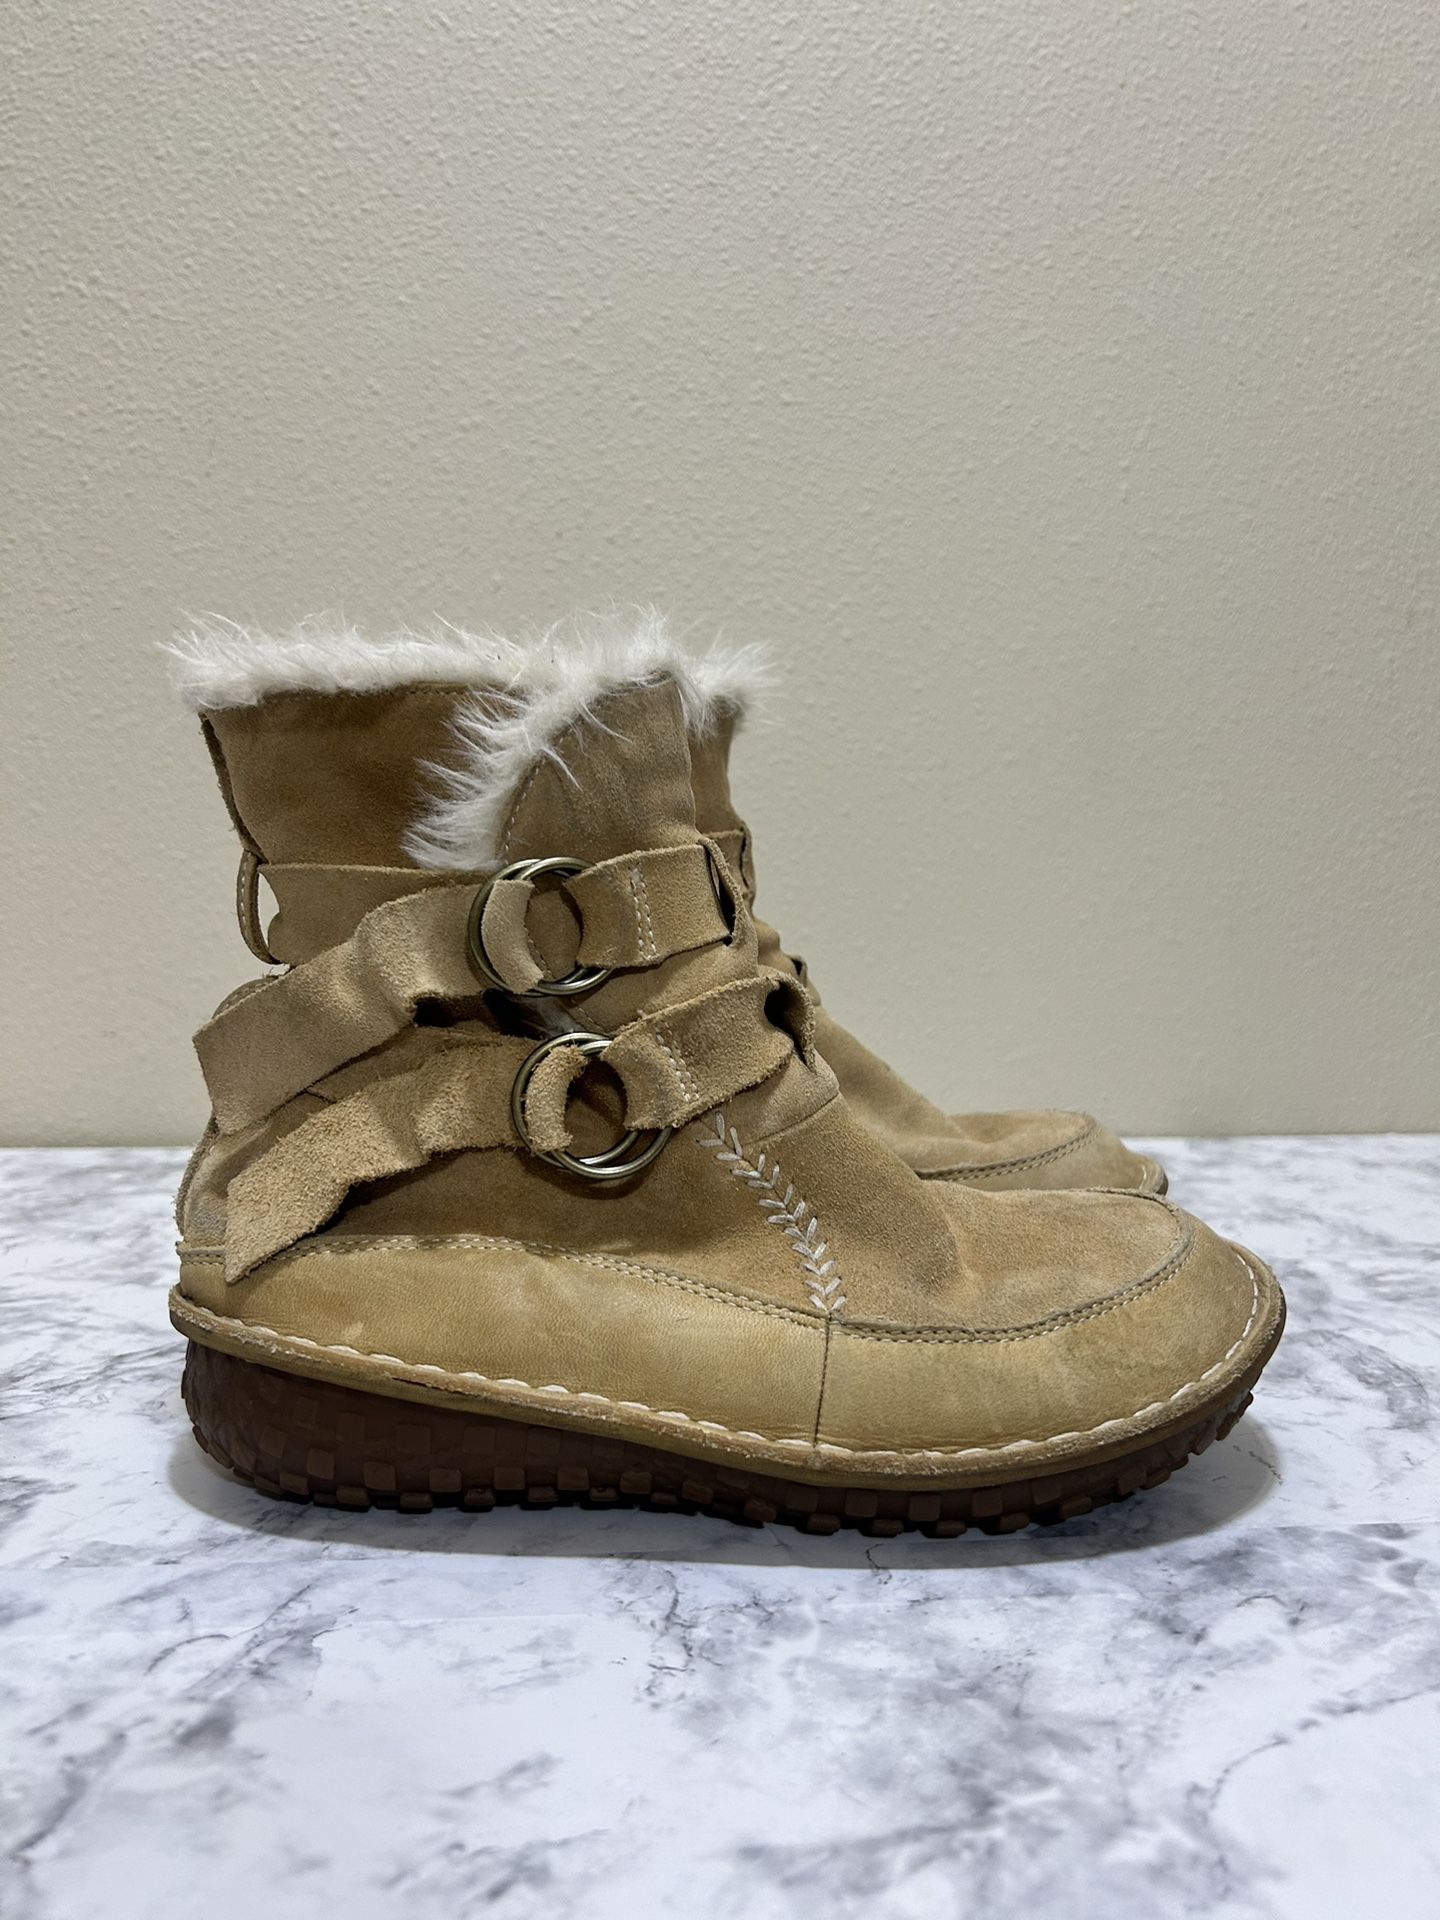 Sorel Tootega Thinsulate Insulation NL1460-261 Tan Suede Faux Boots 6.5 Lining